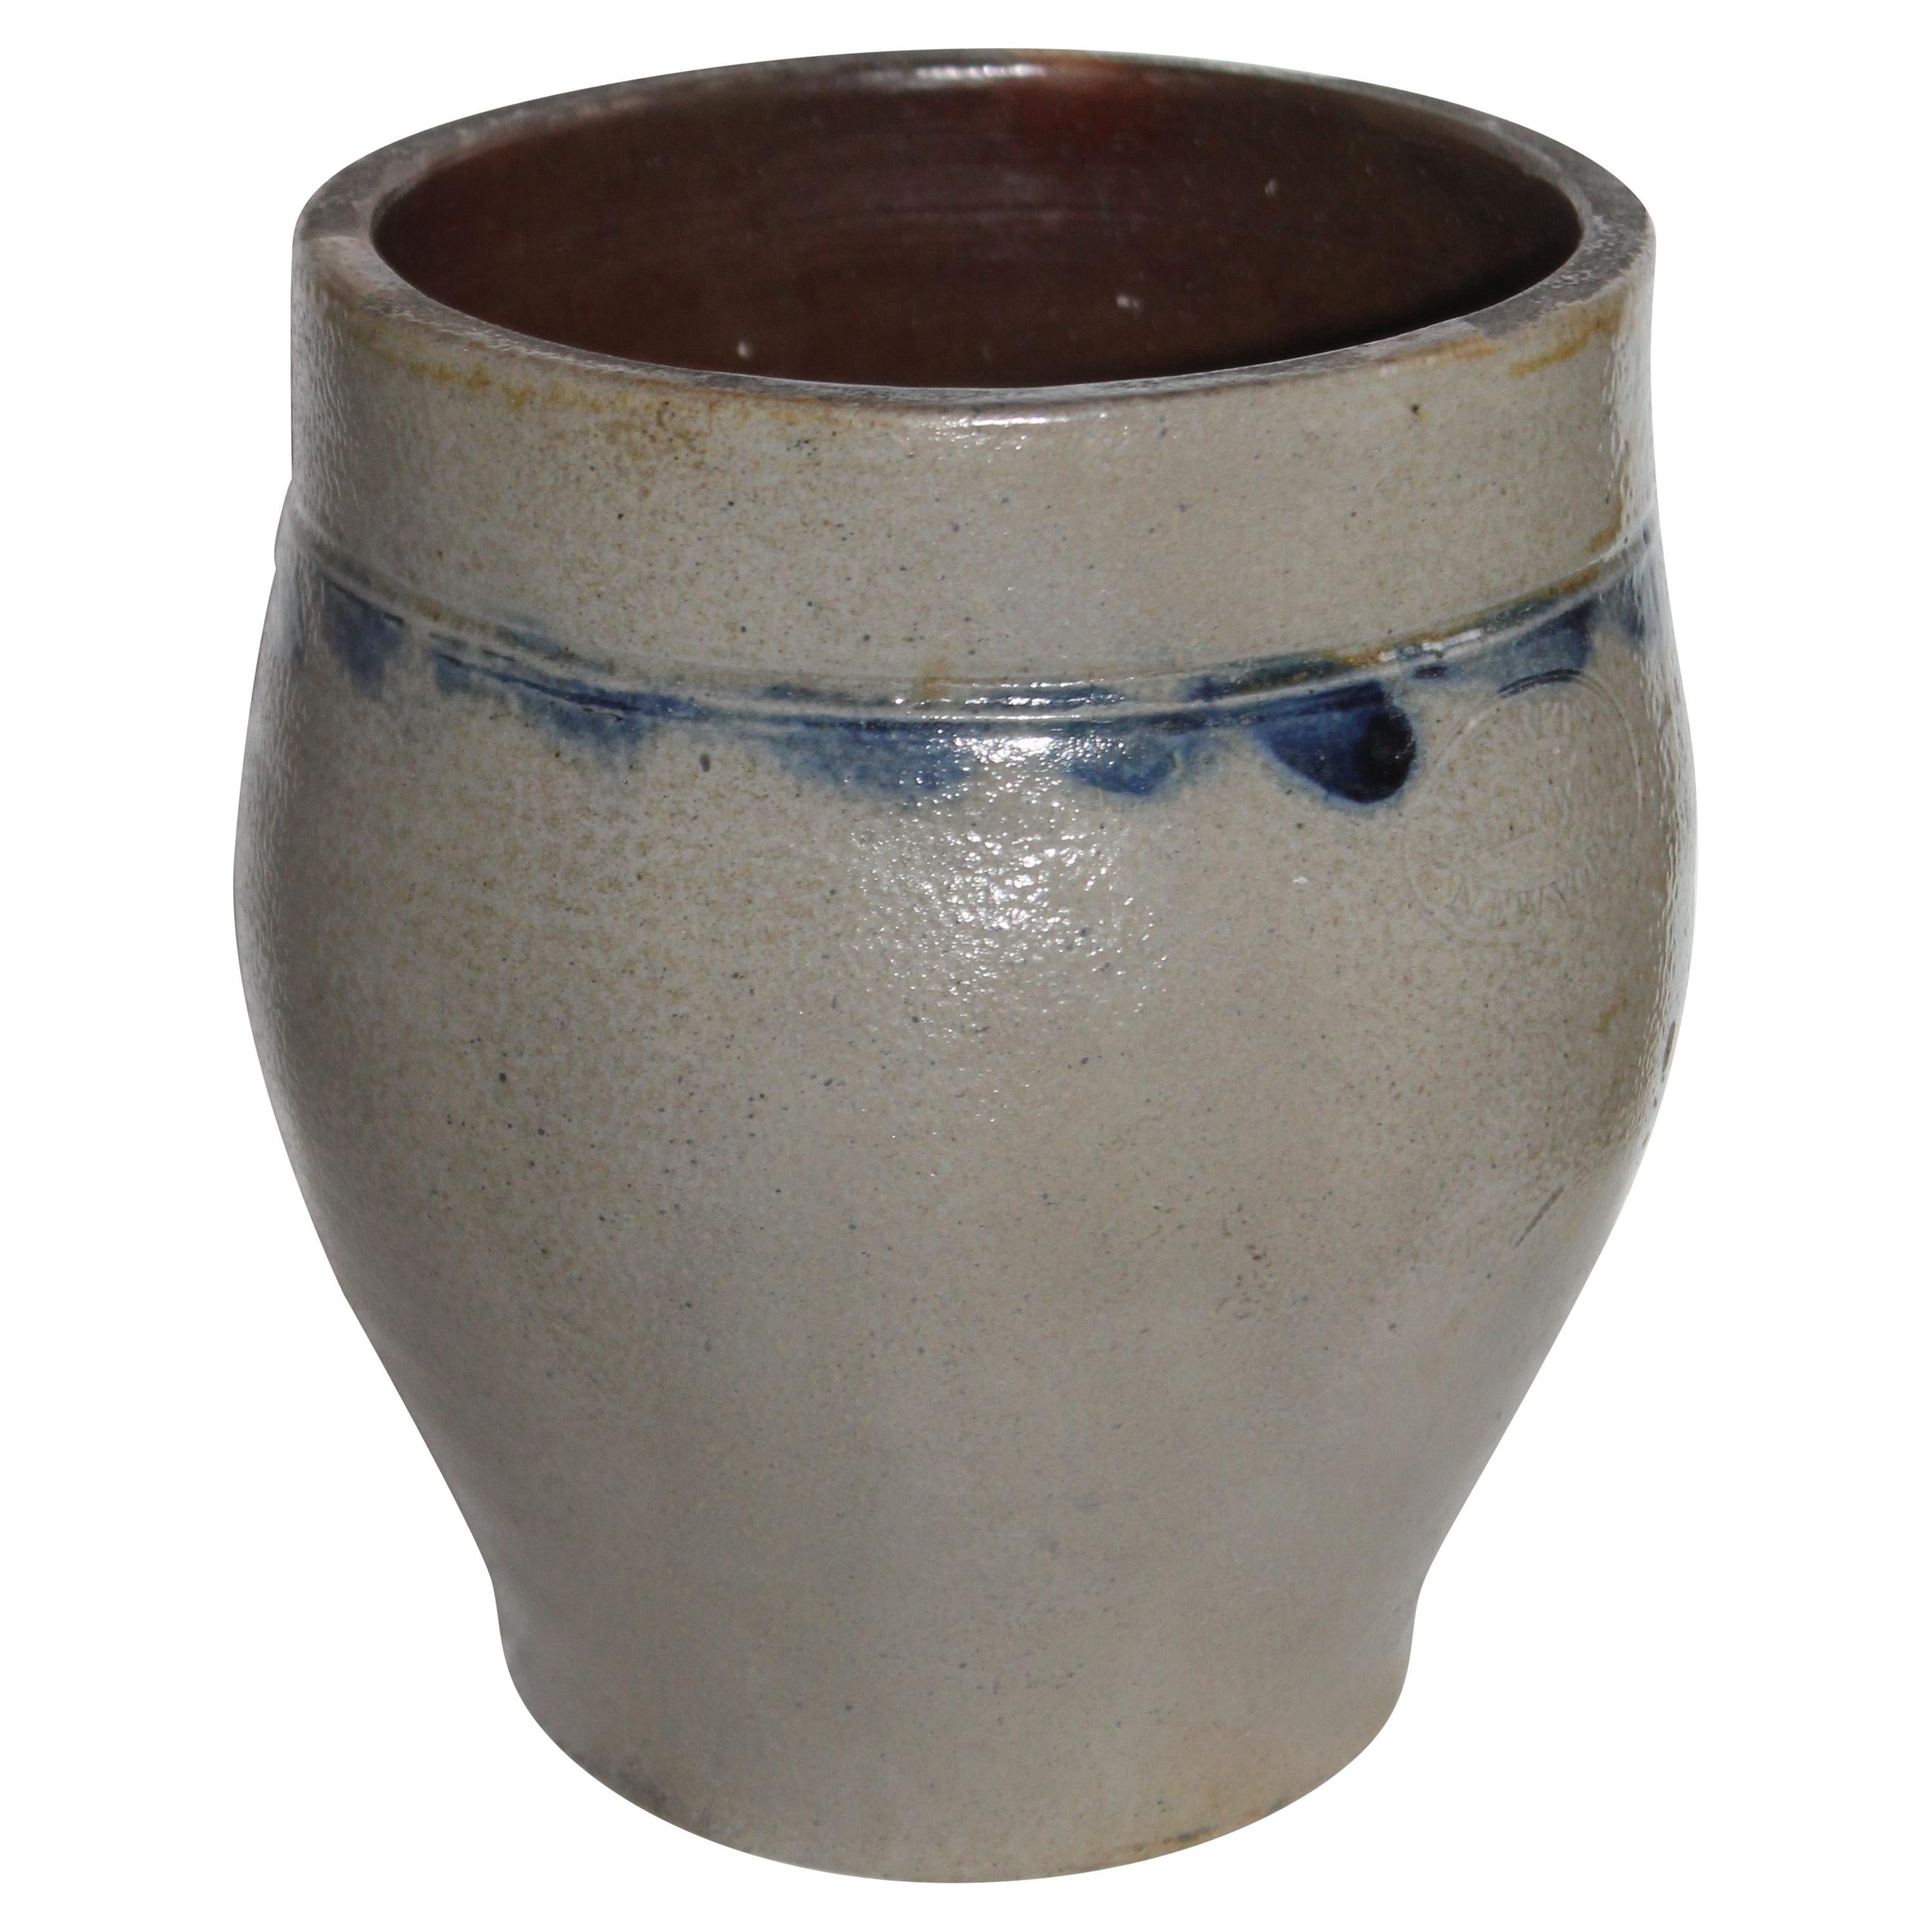 Smith Stoneware Jar Crock from NY For Sale